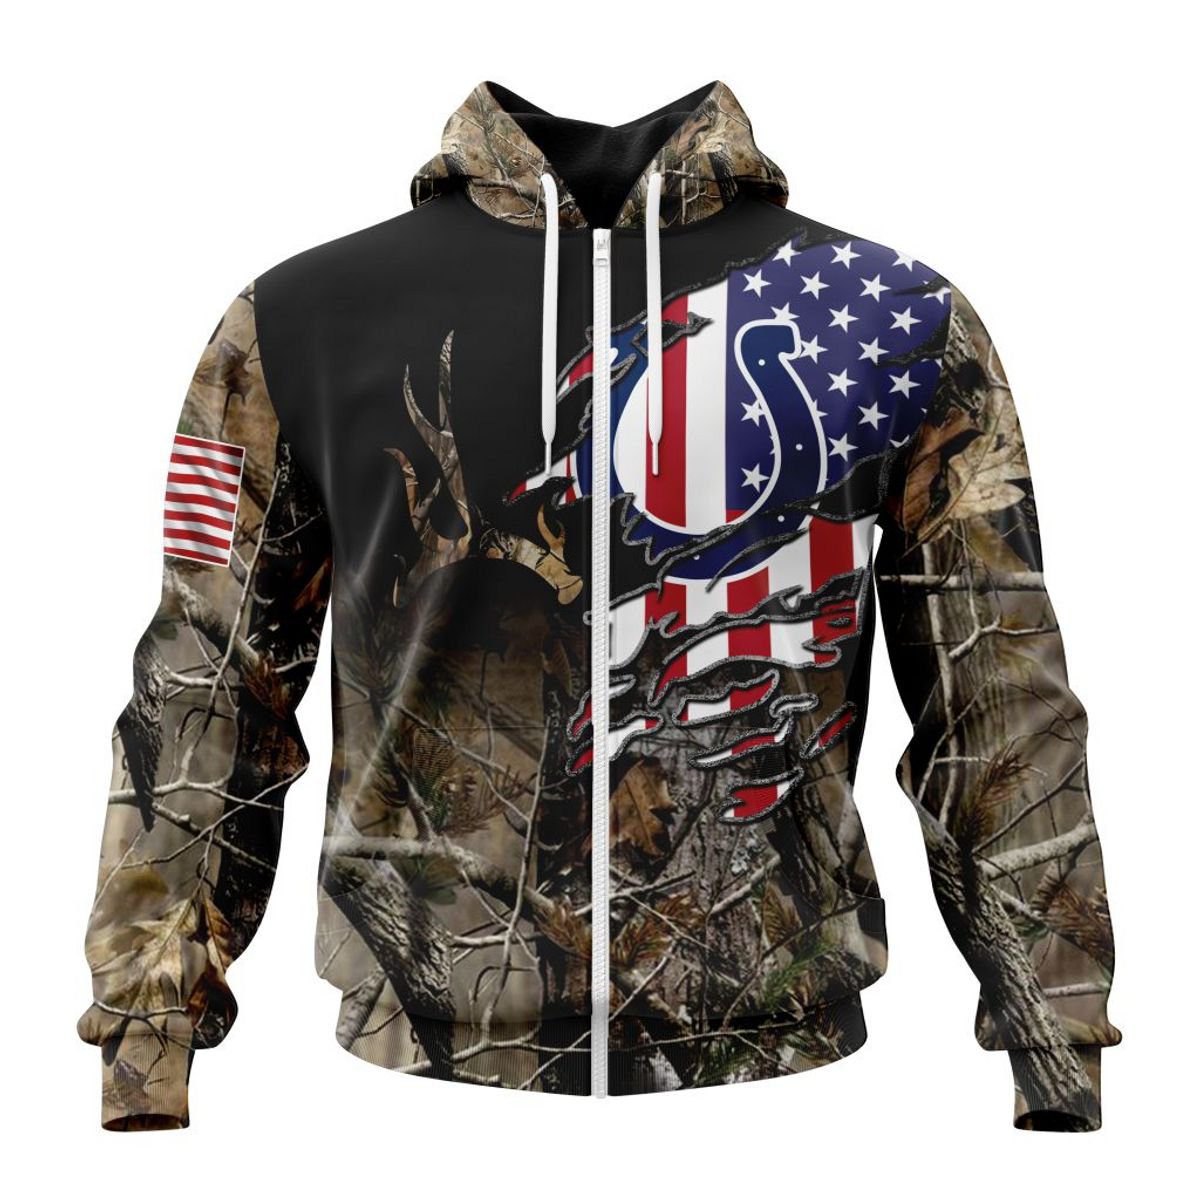 INDIANAPOLIS COLTS 3D HOODIE CAMO REALTREE HUNTING